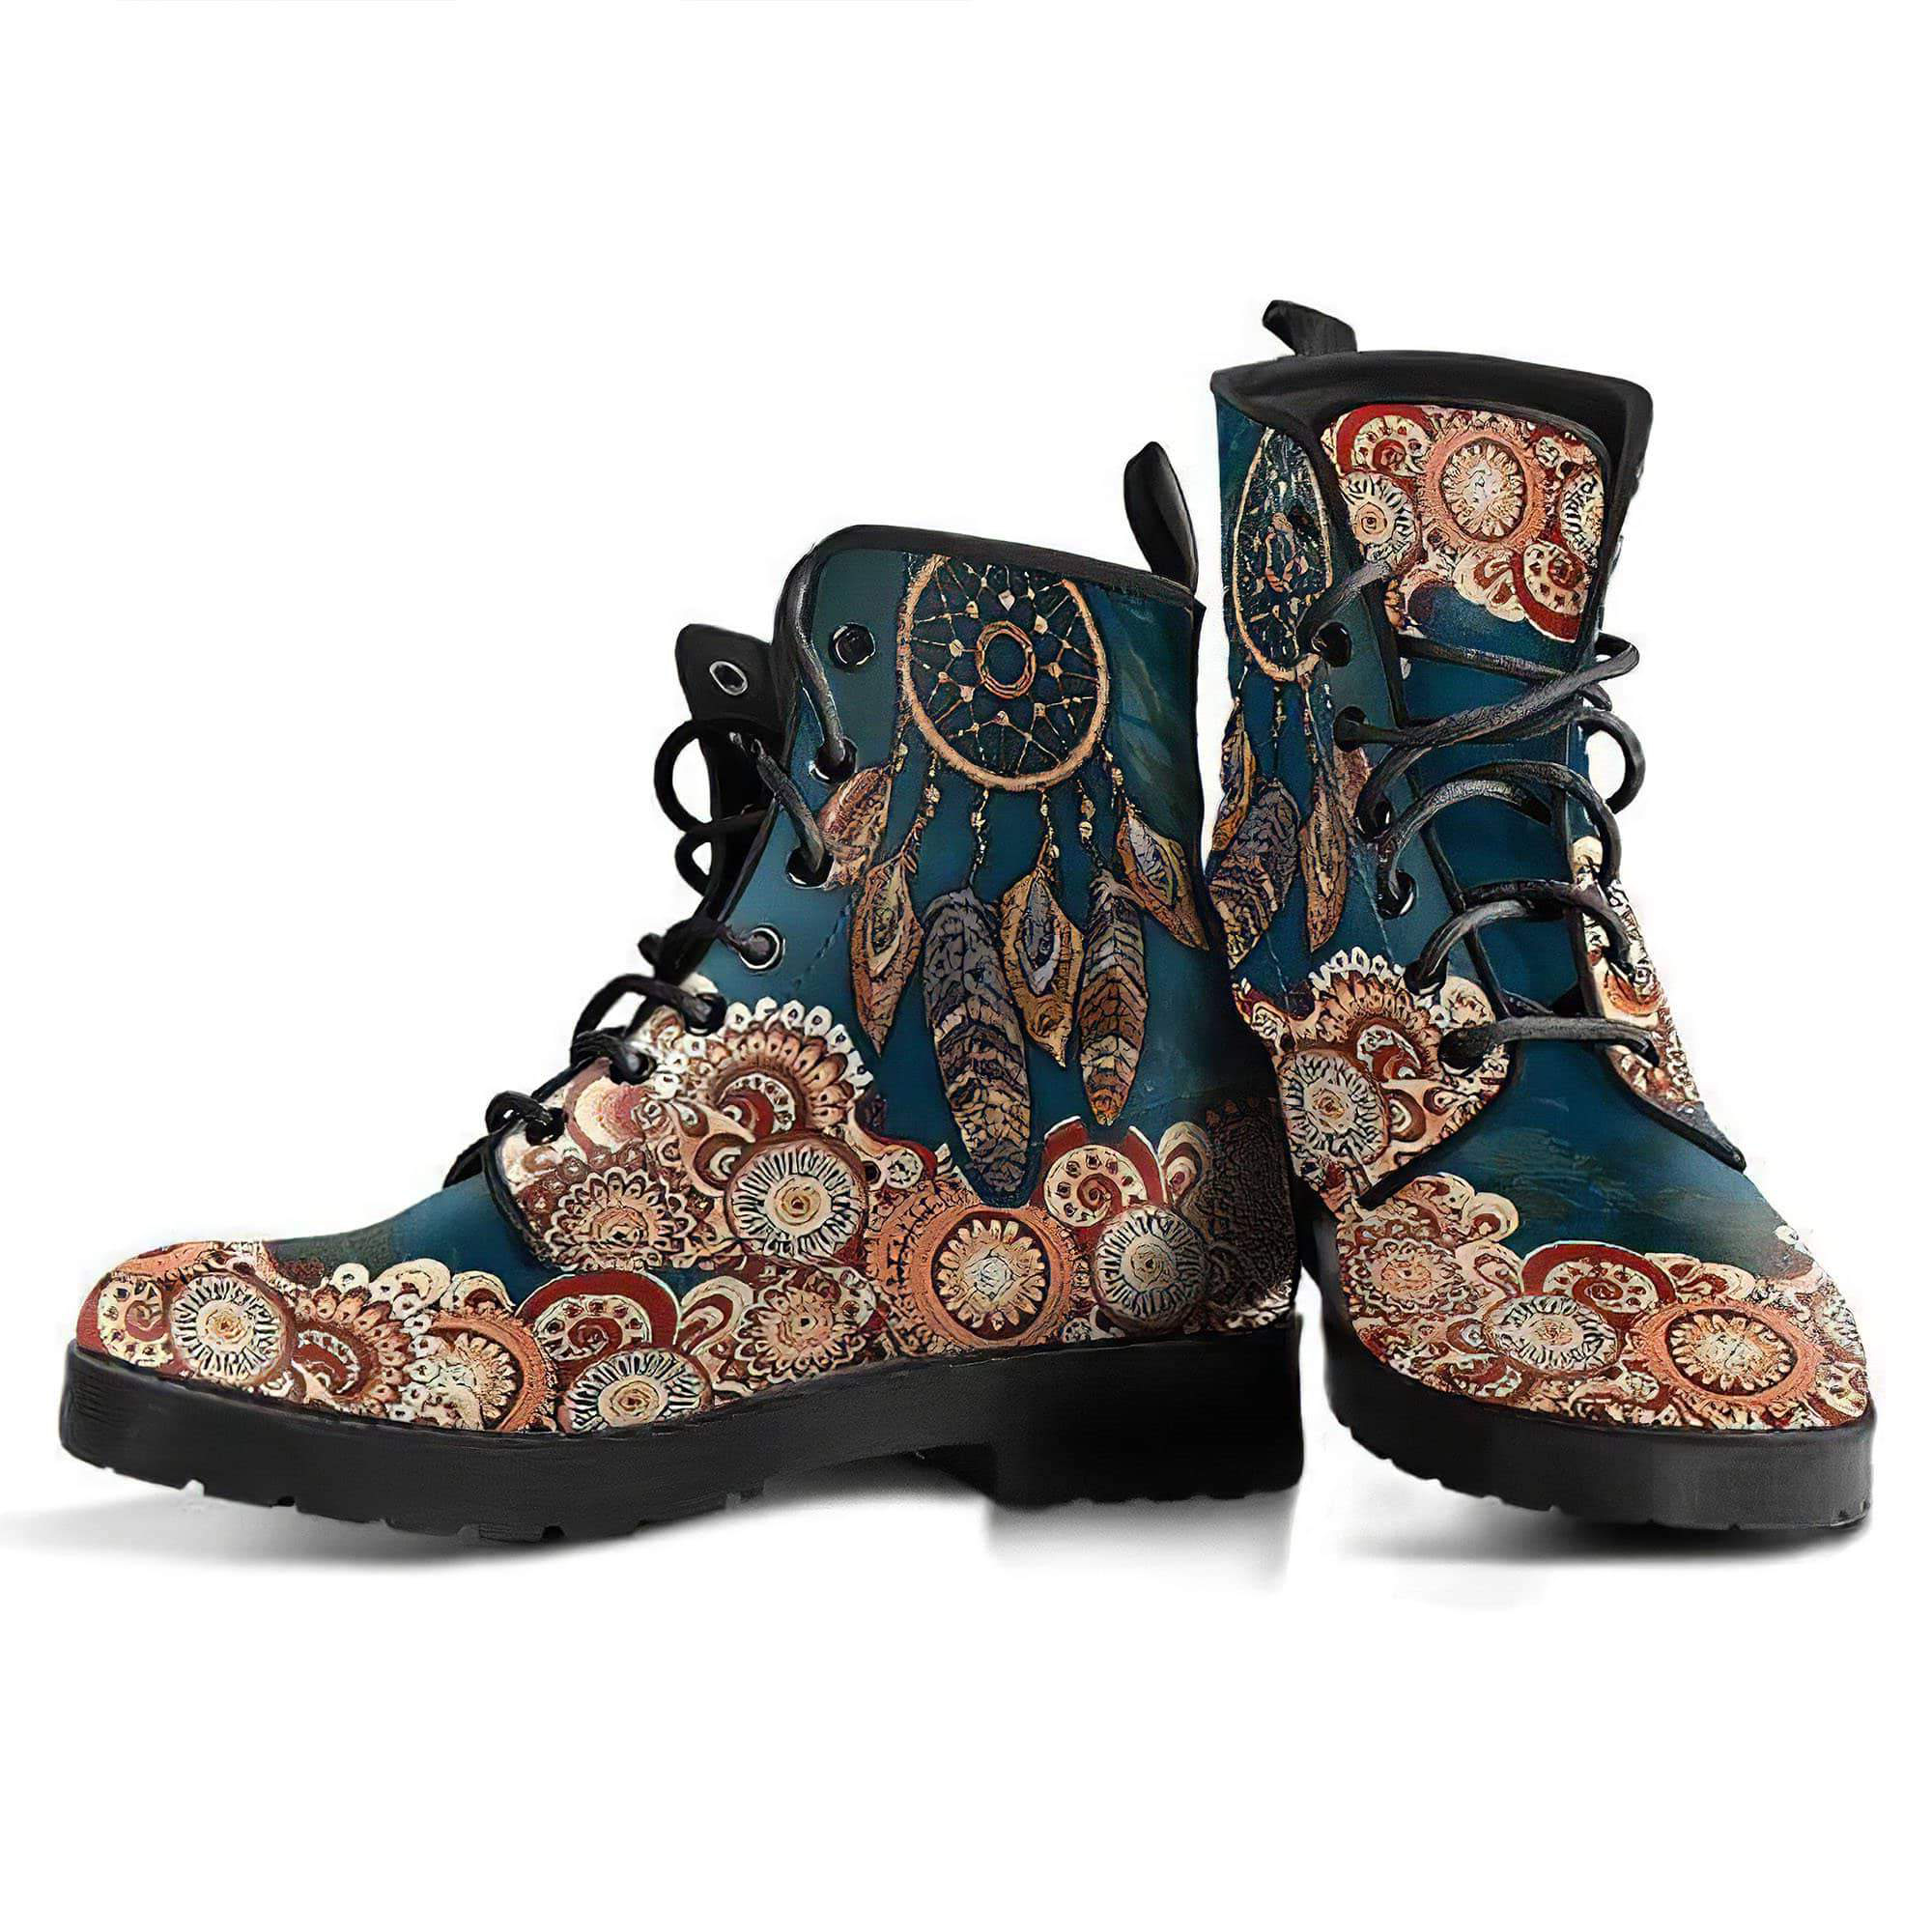 native-dreamcatcher-handcrafted-boots-women-s-leather-boots-12051913900093.jpg